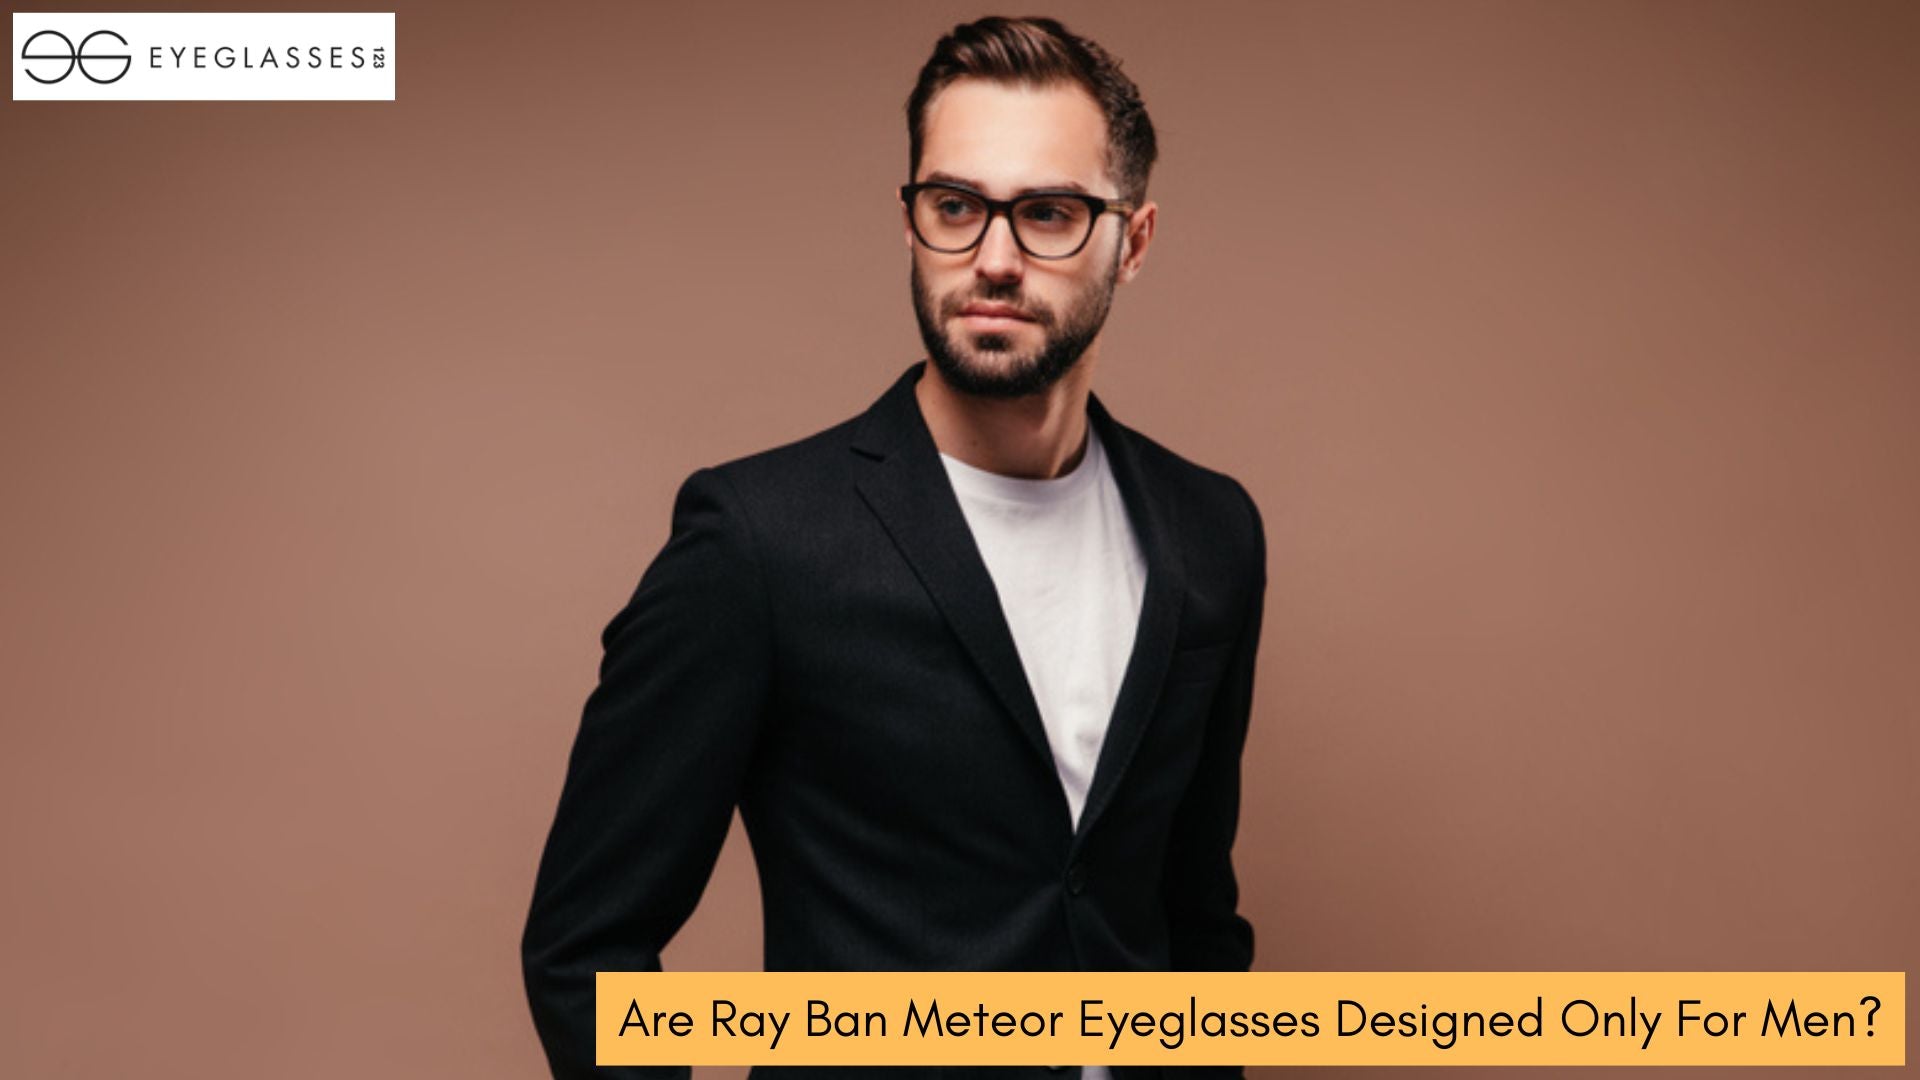 Are Ray Ban Meteor Eyeglasses Designed Only For Men?